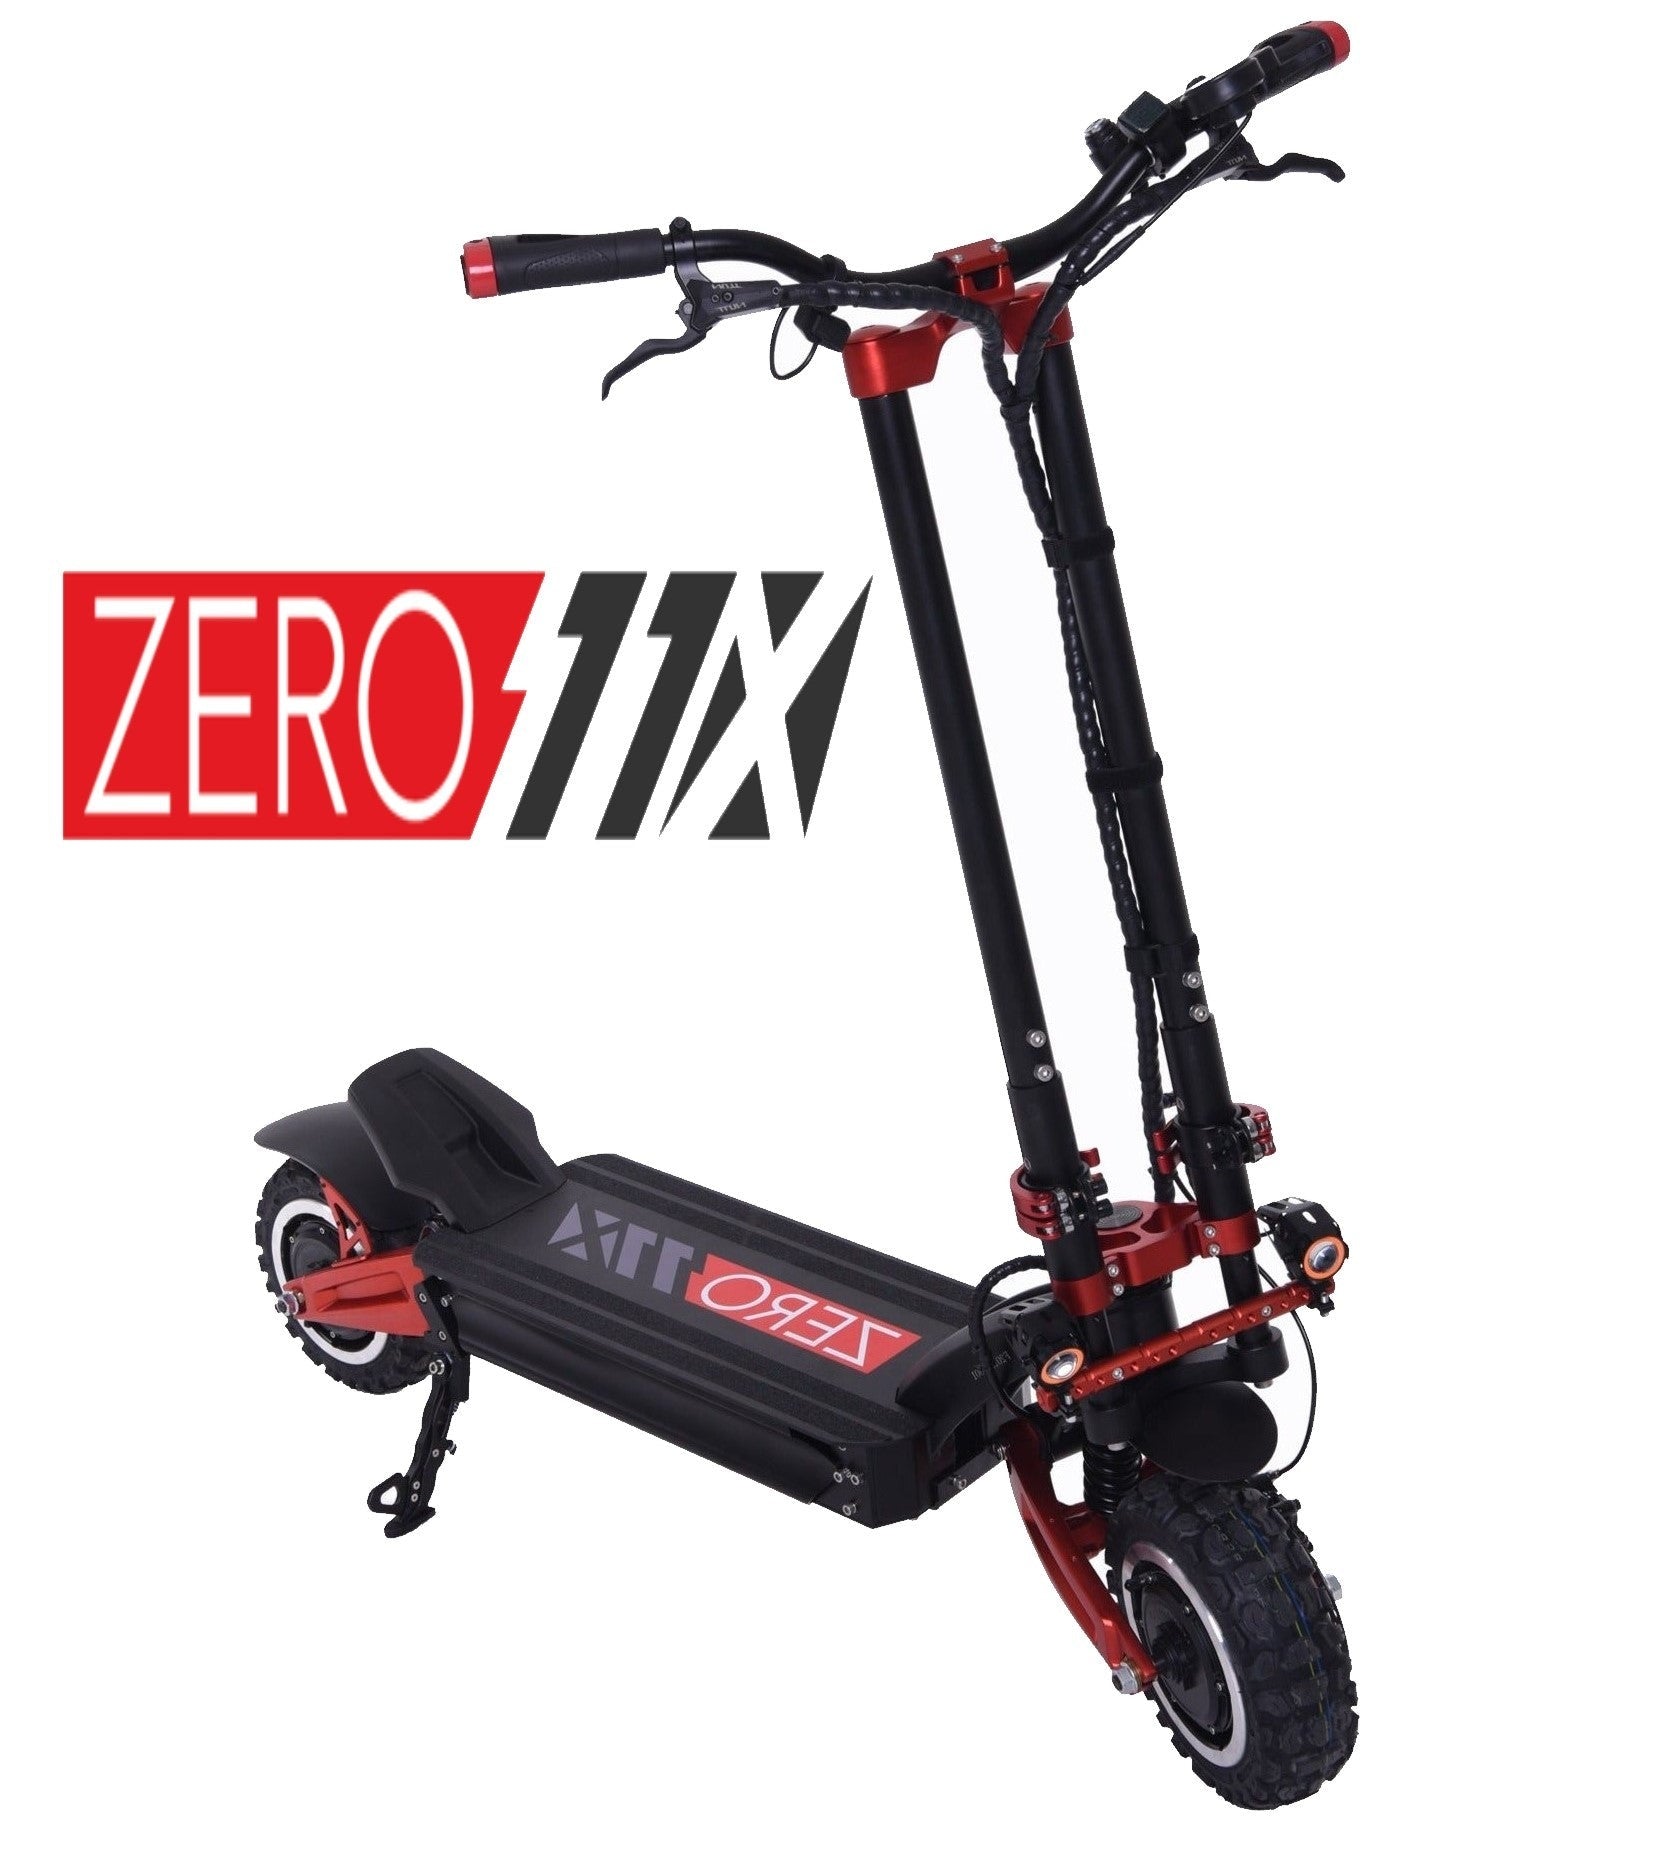 weekend Tordenvejr For tidlig Zero 11X Supremely Powerful Electric Scooter | E-Scooter - ZERO & VSETT -  Malaysia's Best Electric Scooter